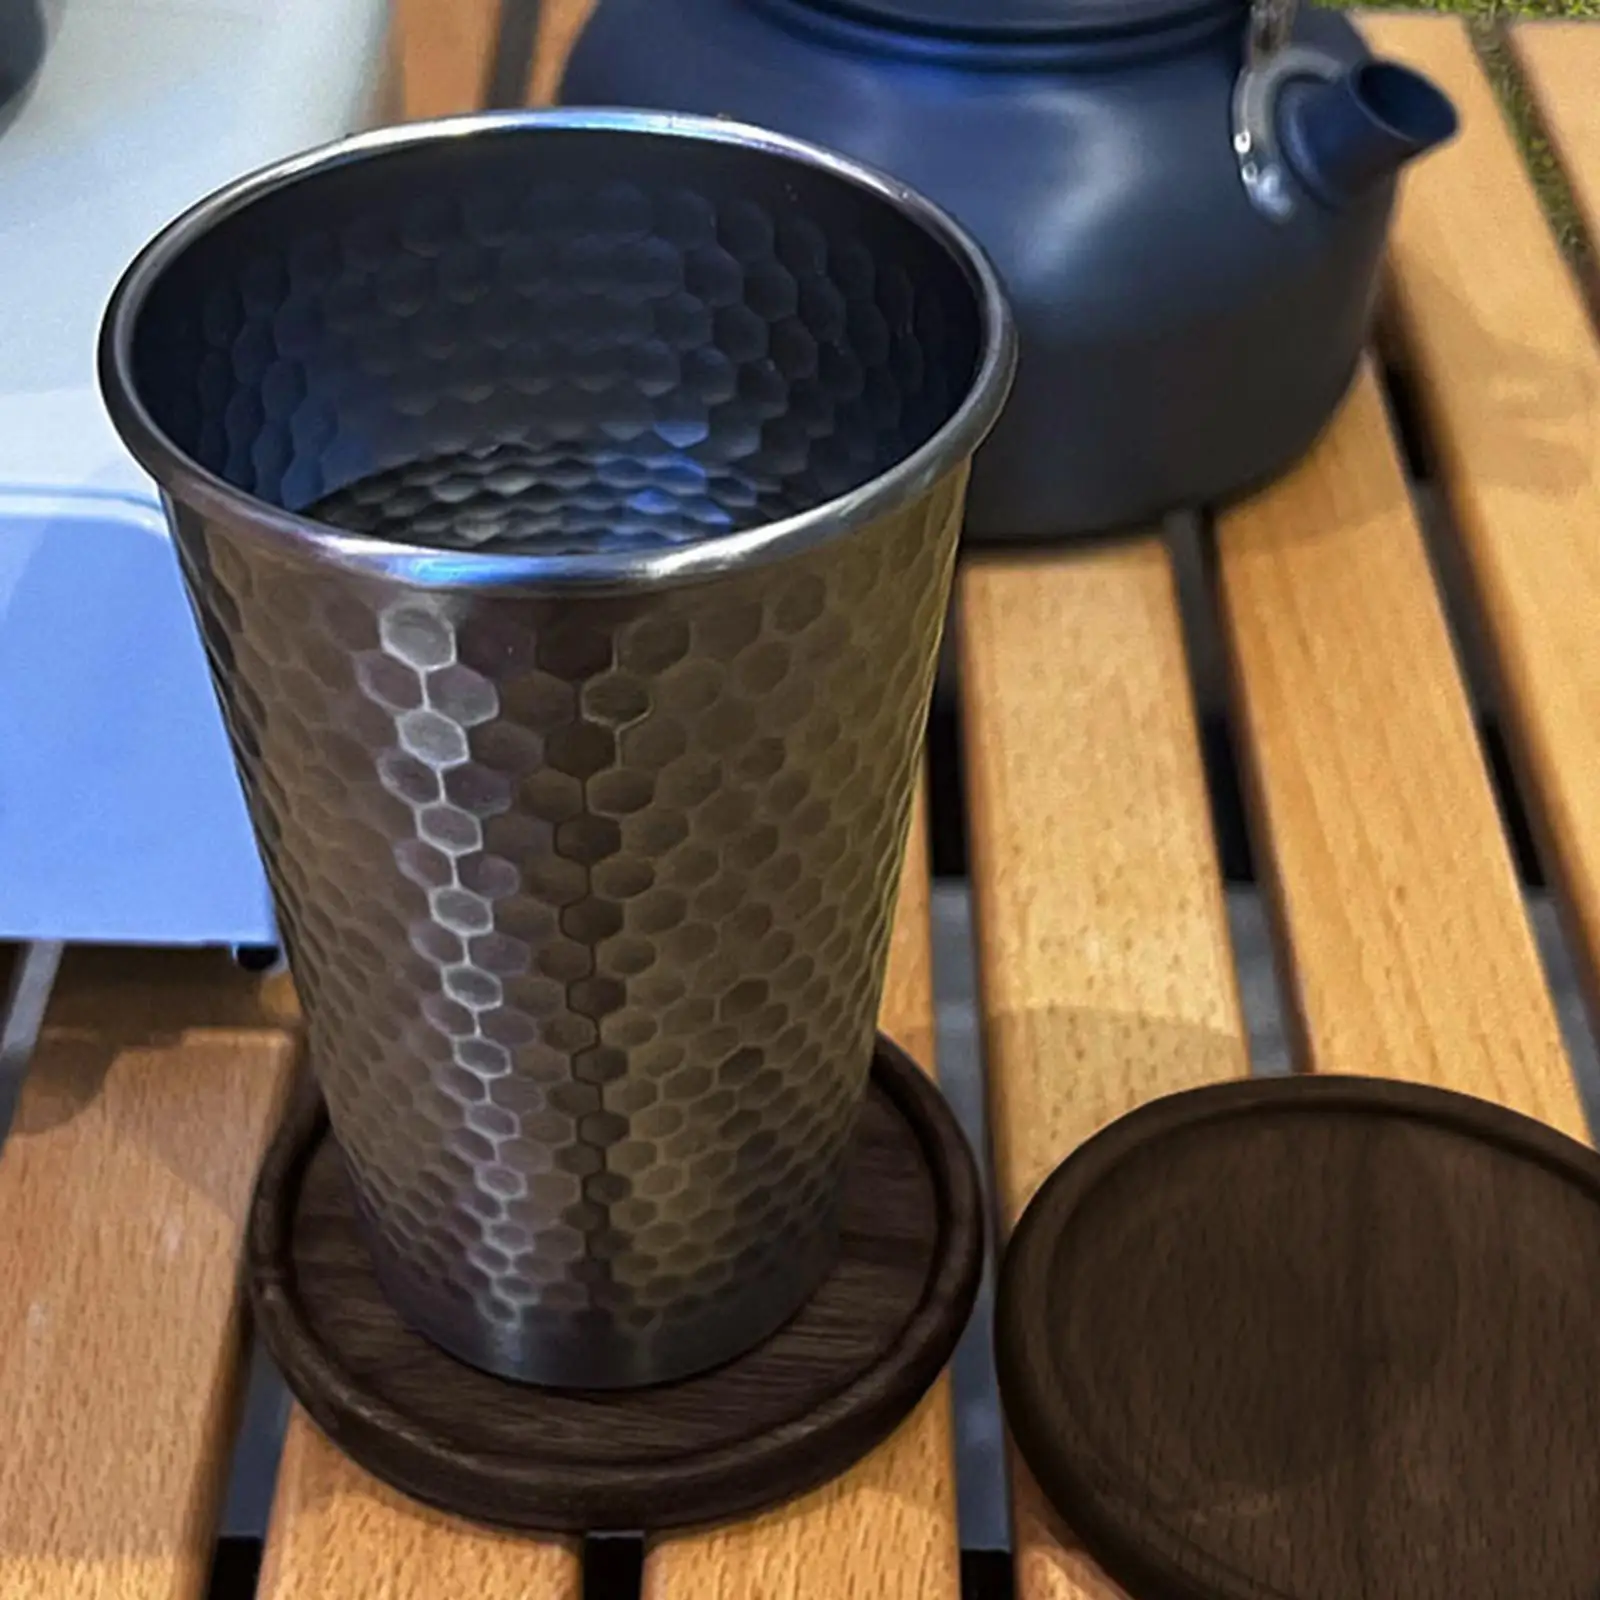 Portable Stainless Steel Cup Camping Mugs 350ml Tea Water Cups for Travel Cooking Backpacking Picnic Utensils Hiking Outdoor